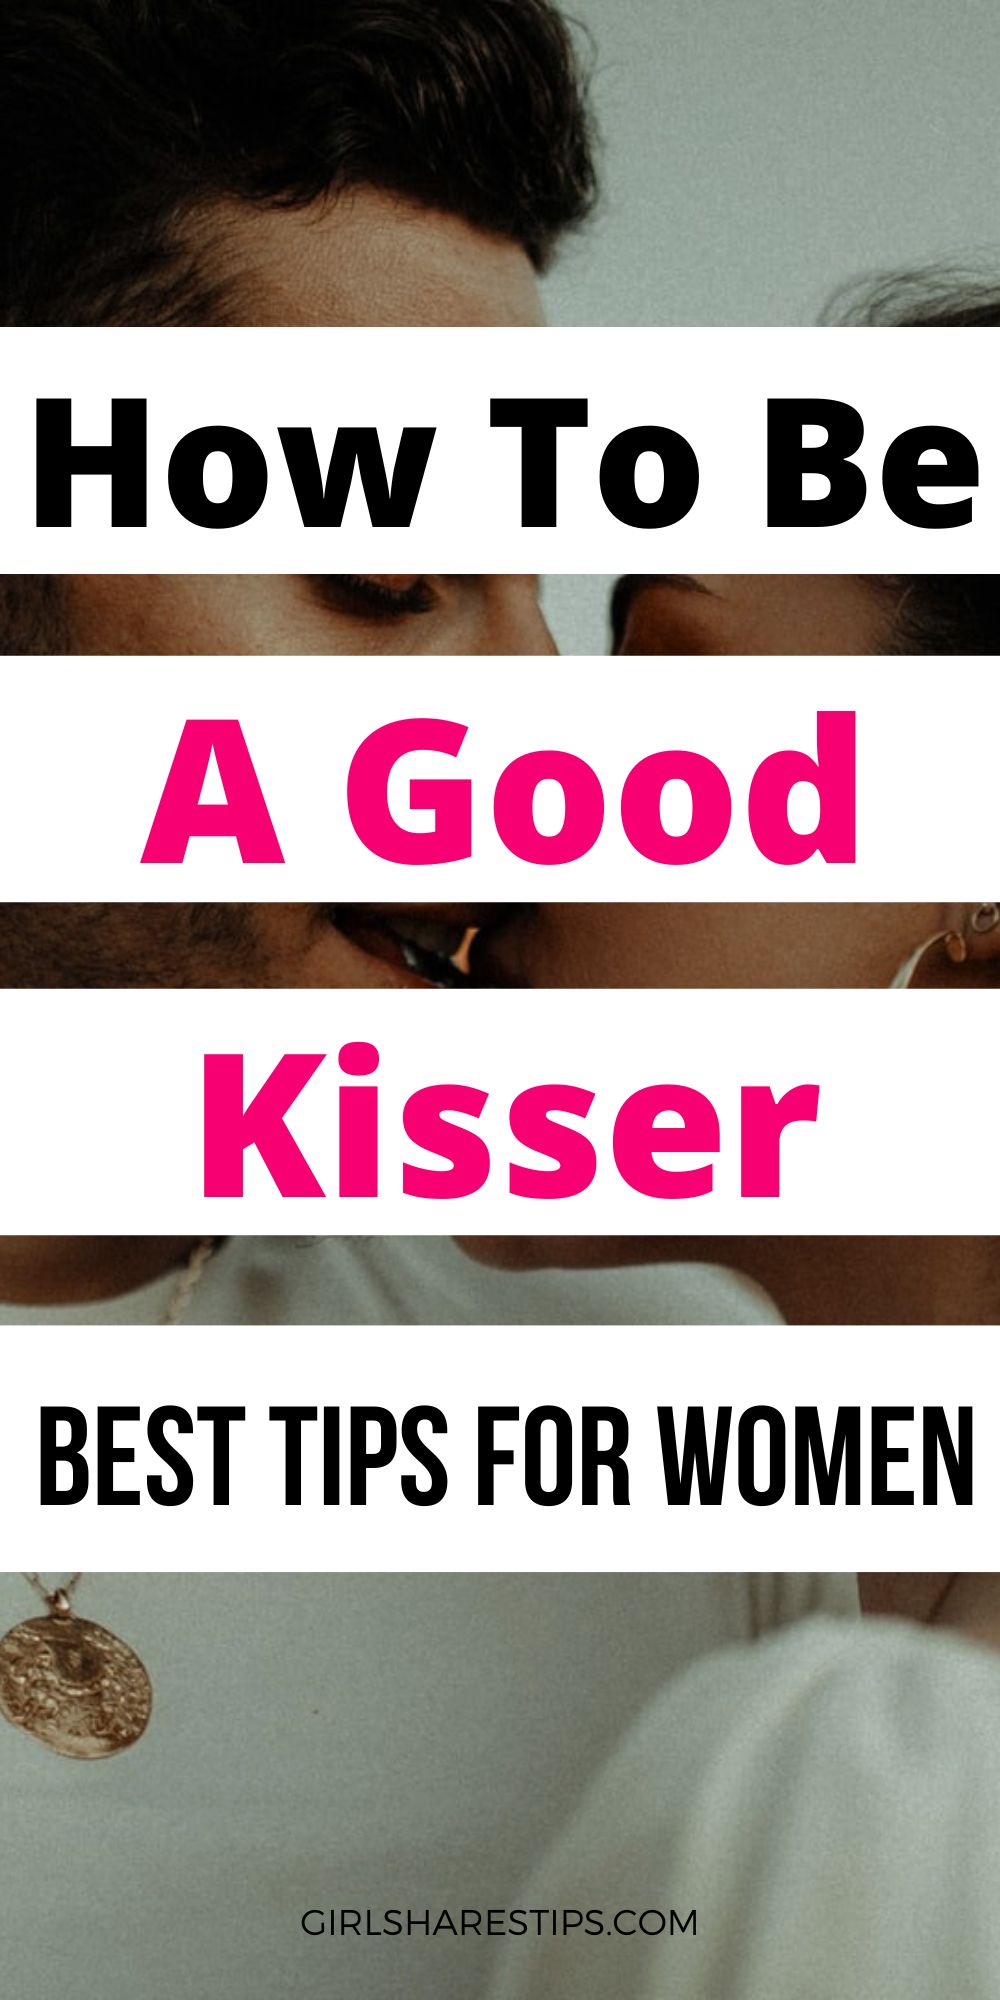 how to be a good kisser and kiss a guy well